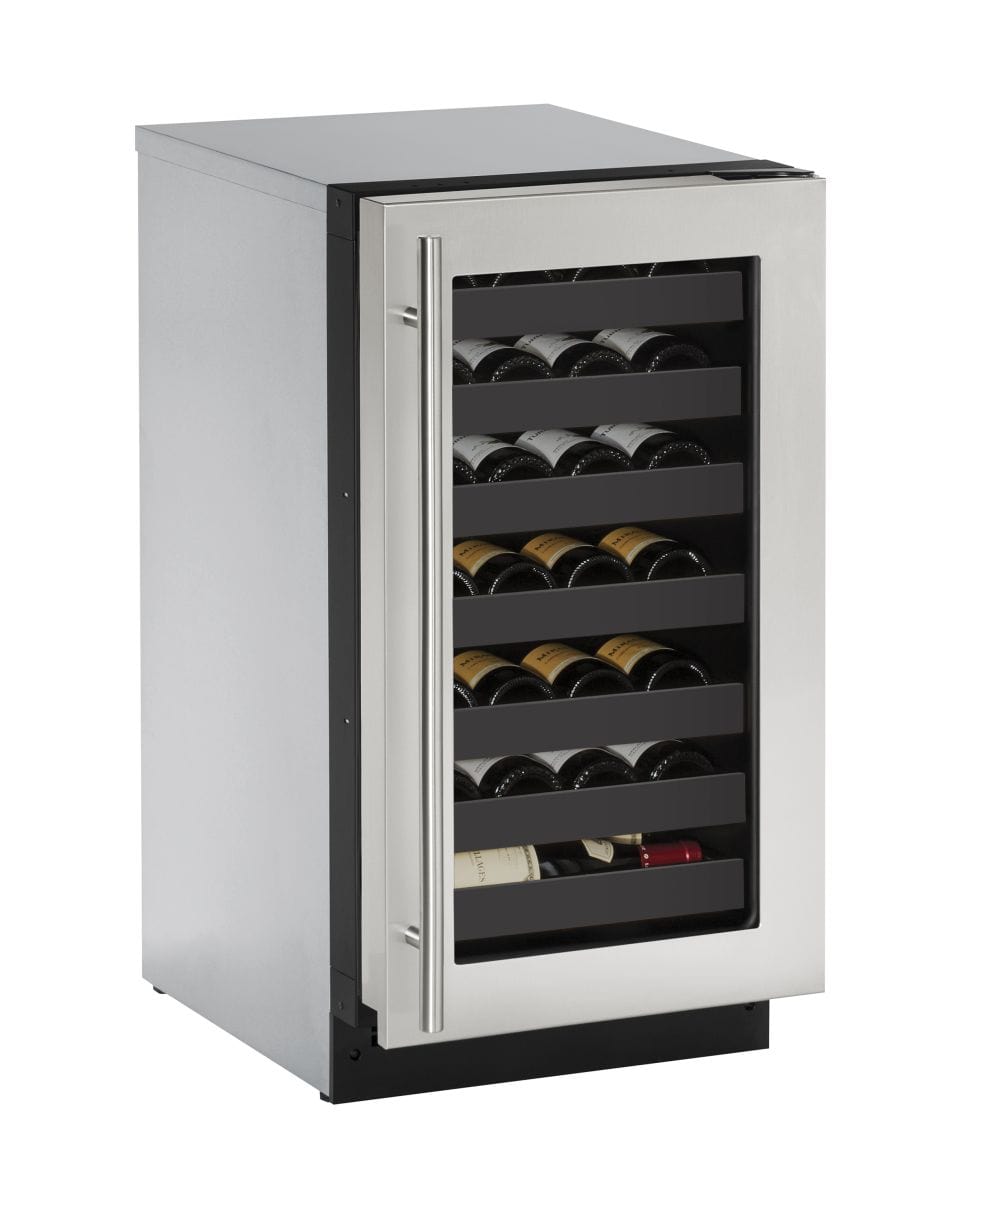 U-Line 2218WC 18" Wine Refrigerator Reversible Hinge Integrated/Stainless Frame Wine Coolers Luxury Appliances Direct